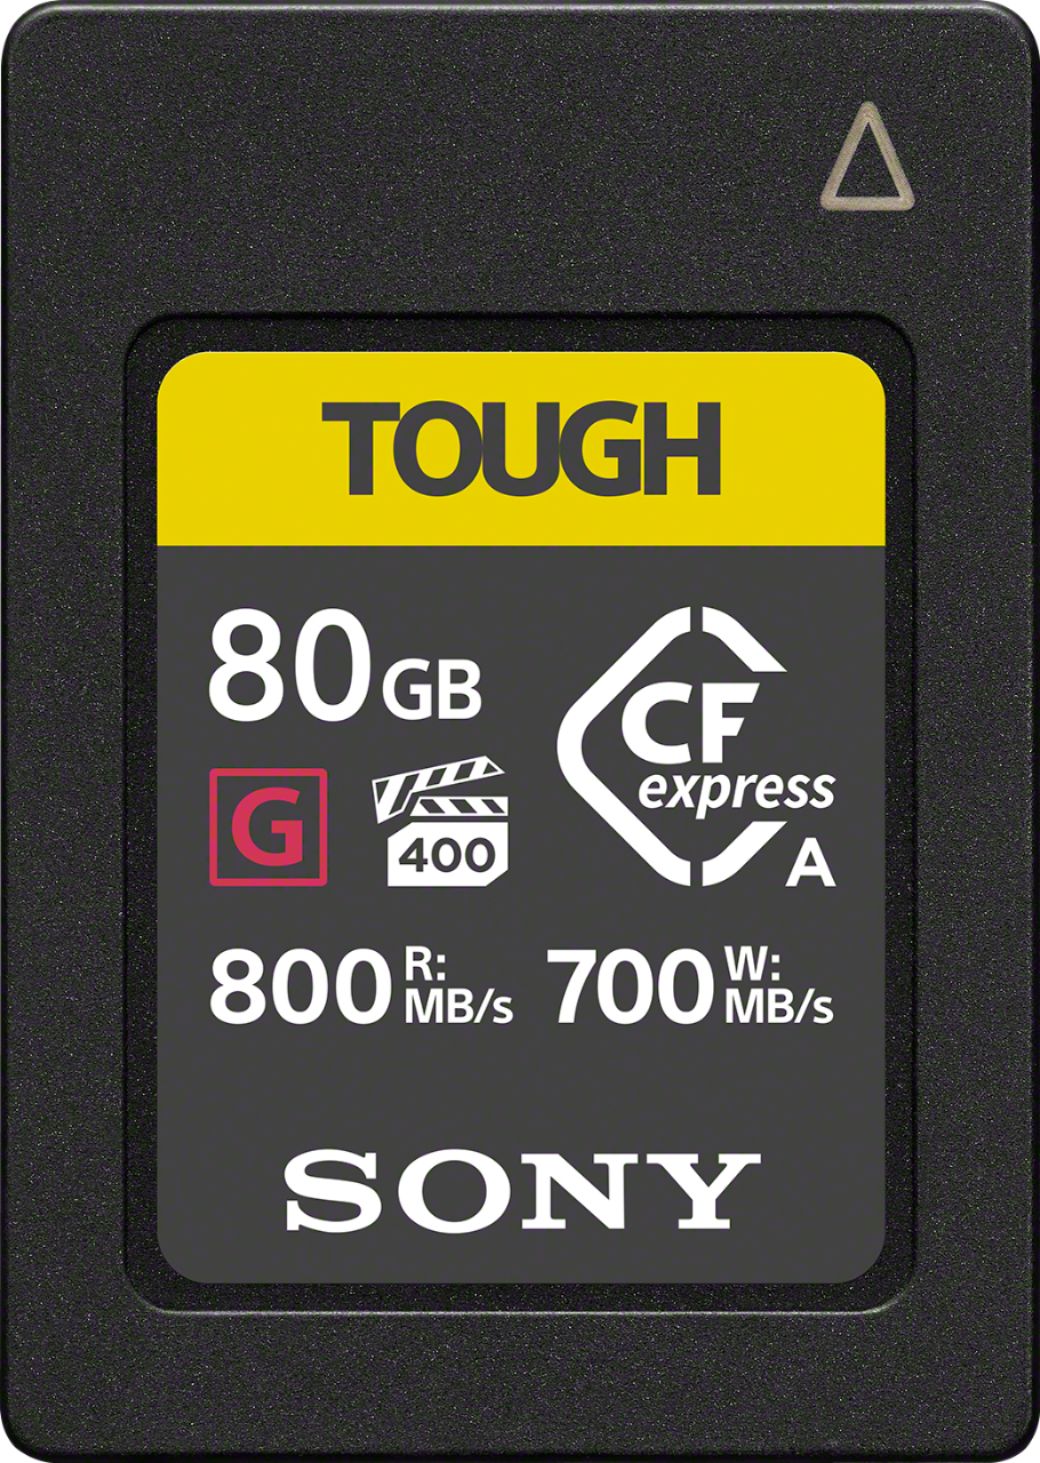 Sony - TOUGH Series 80GB CFexpress Type A Memory Card_0